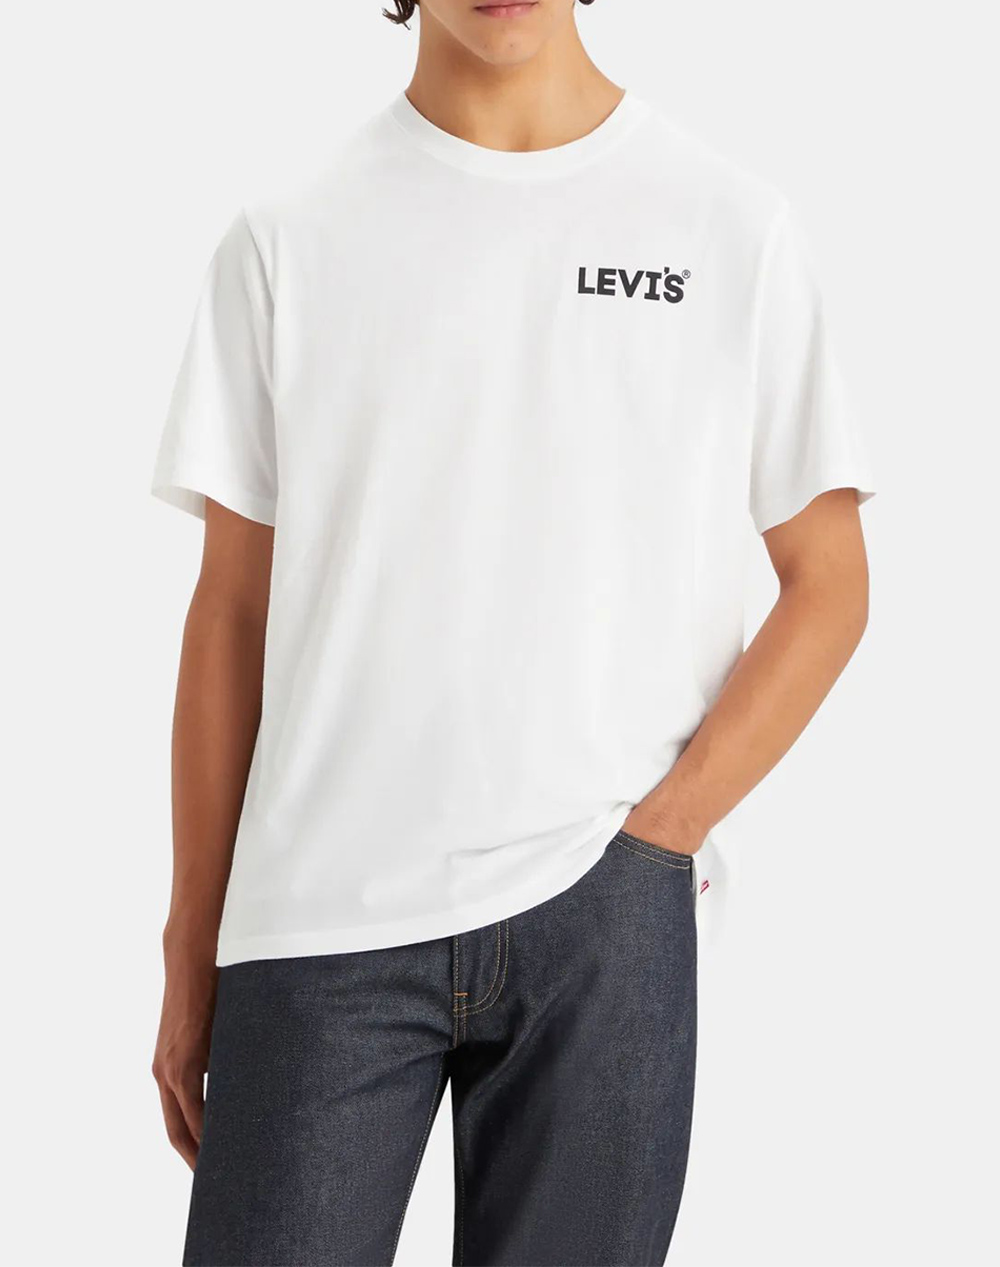 LEVIS RELAXED FIT TEE 16143-1427-1427 White